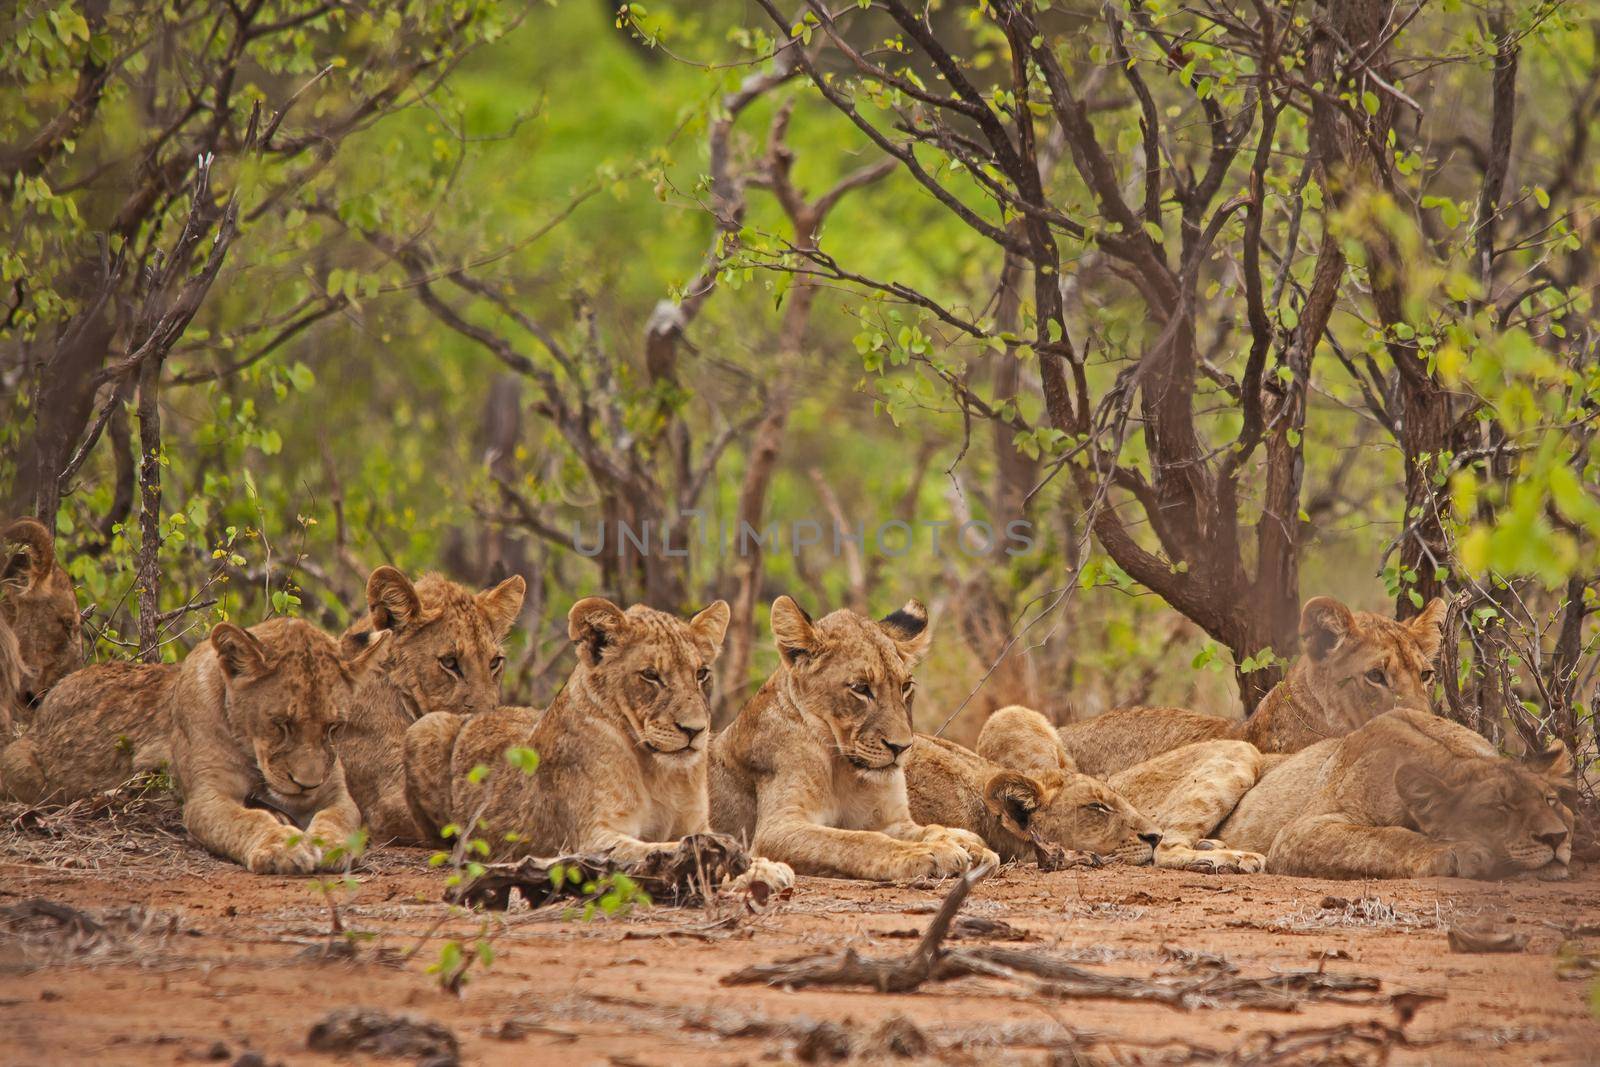 Resting young lions (Panthera leo) 15084 by kobus_peche